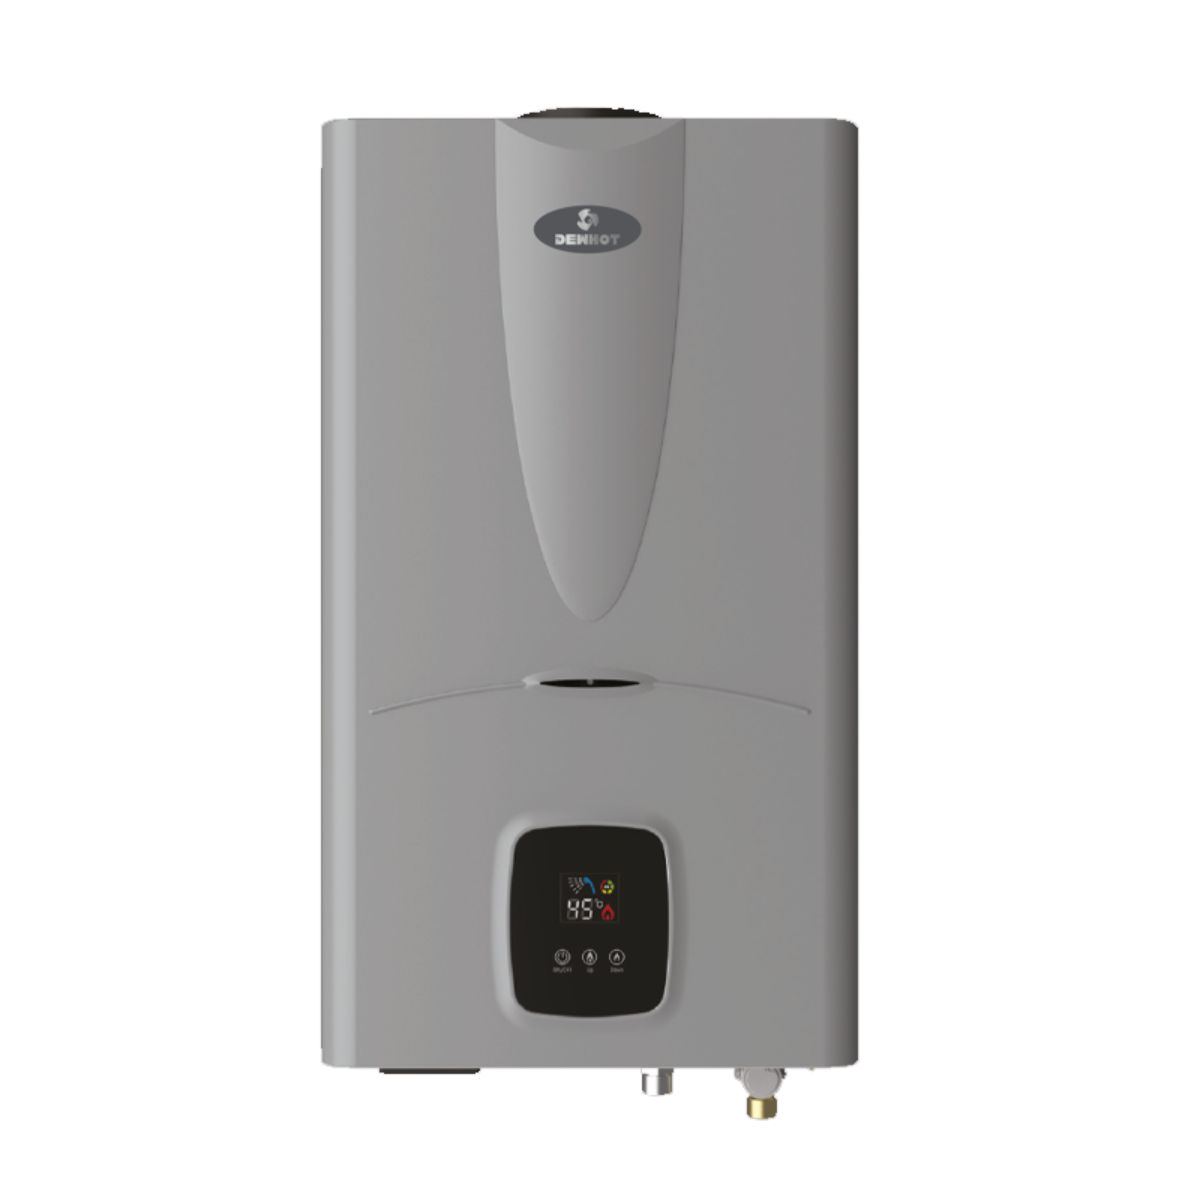 Dewhot 16 Litre Constant Temperature Water Heater - Sustainable.co.za